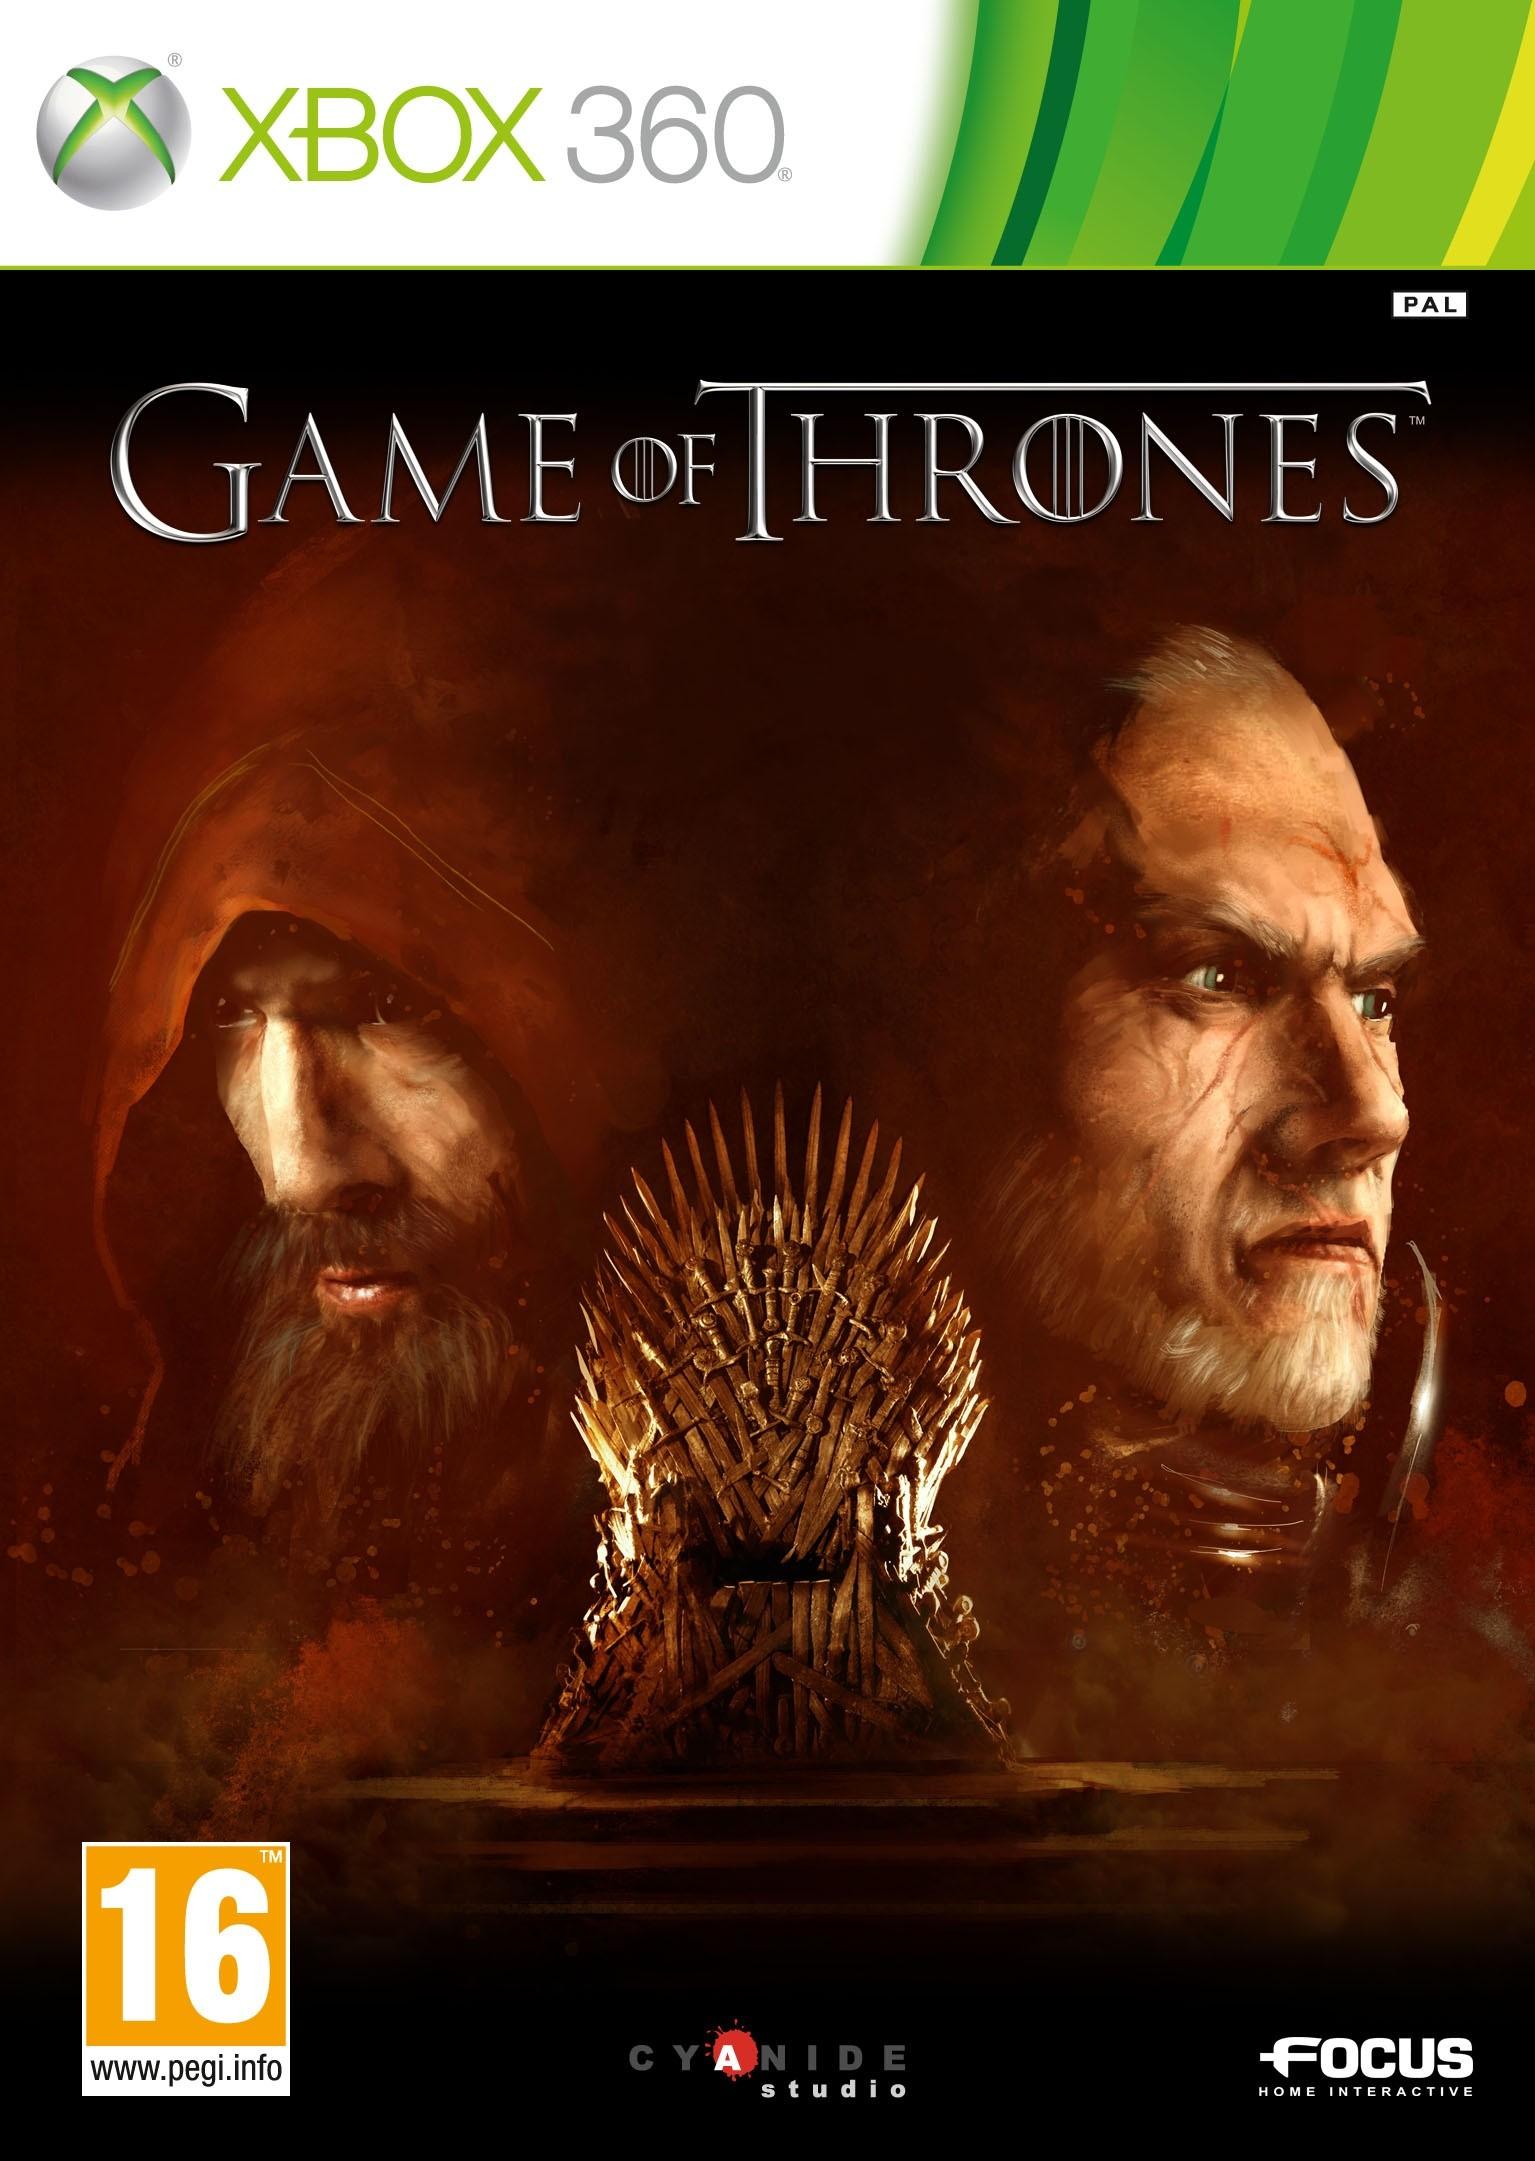 Game of Thrones | €6.99 |